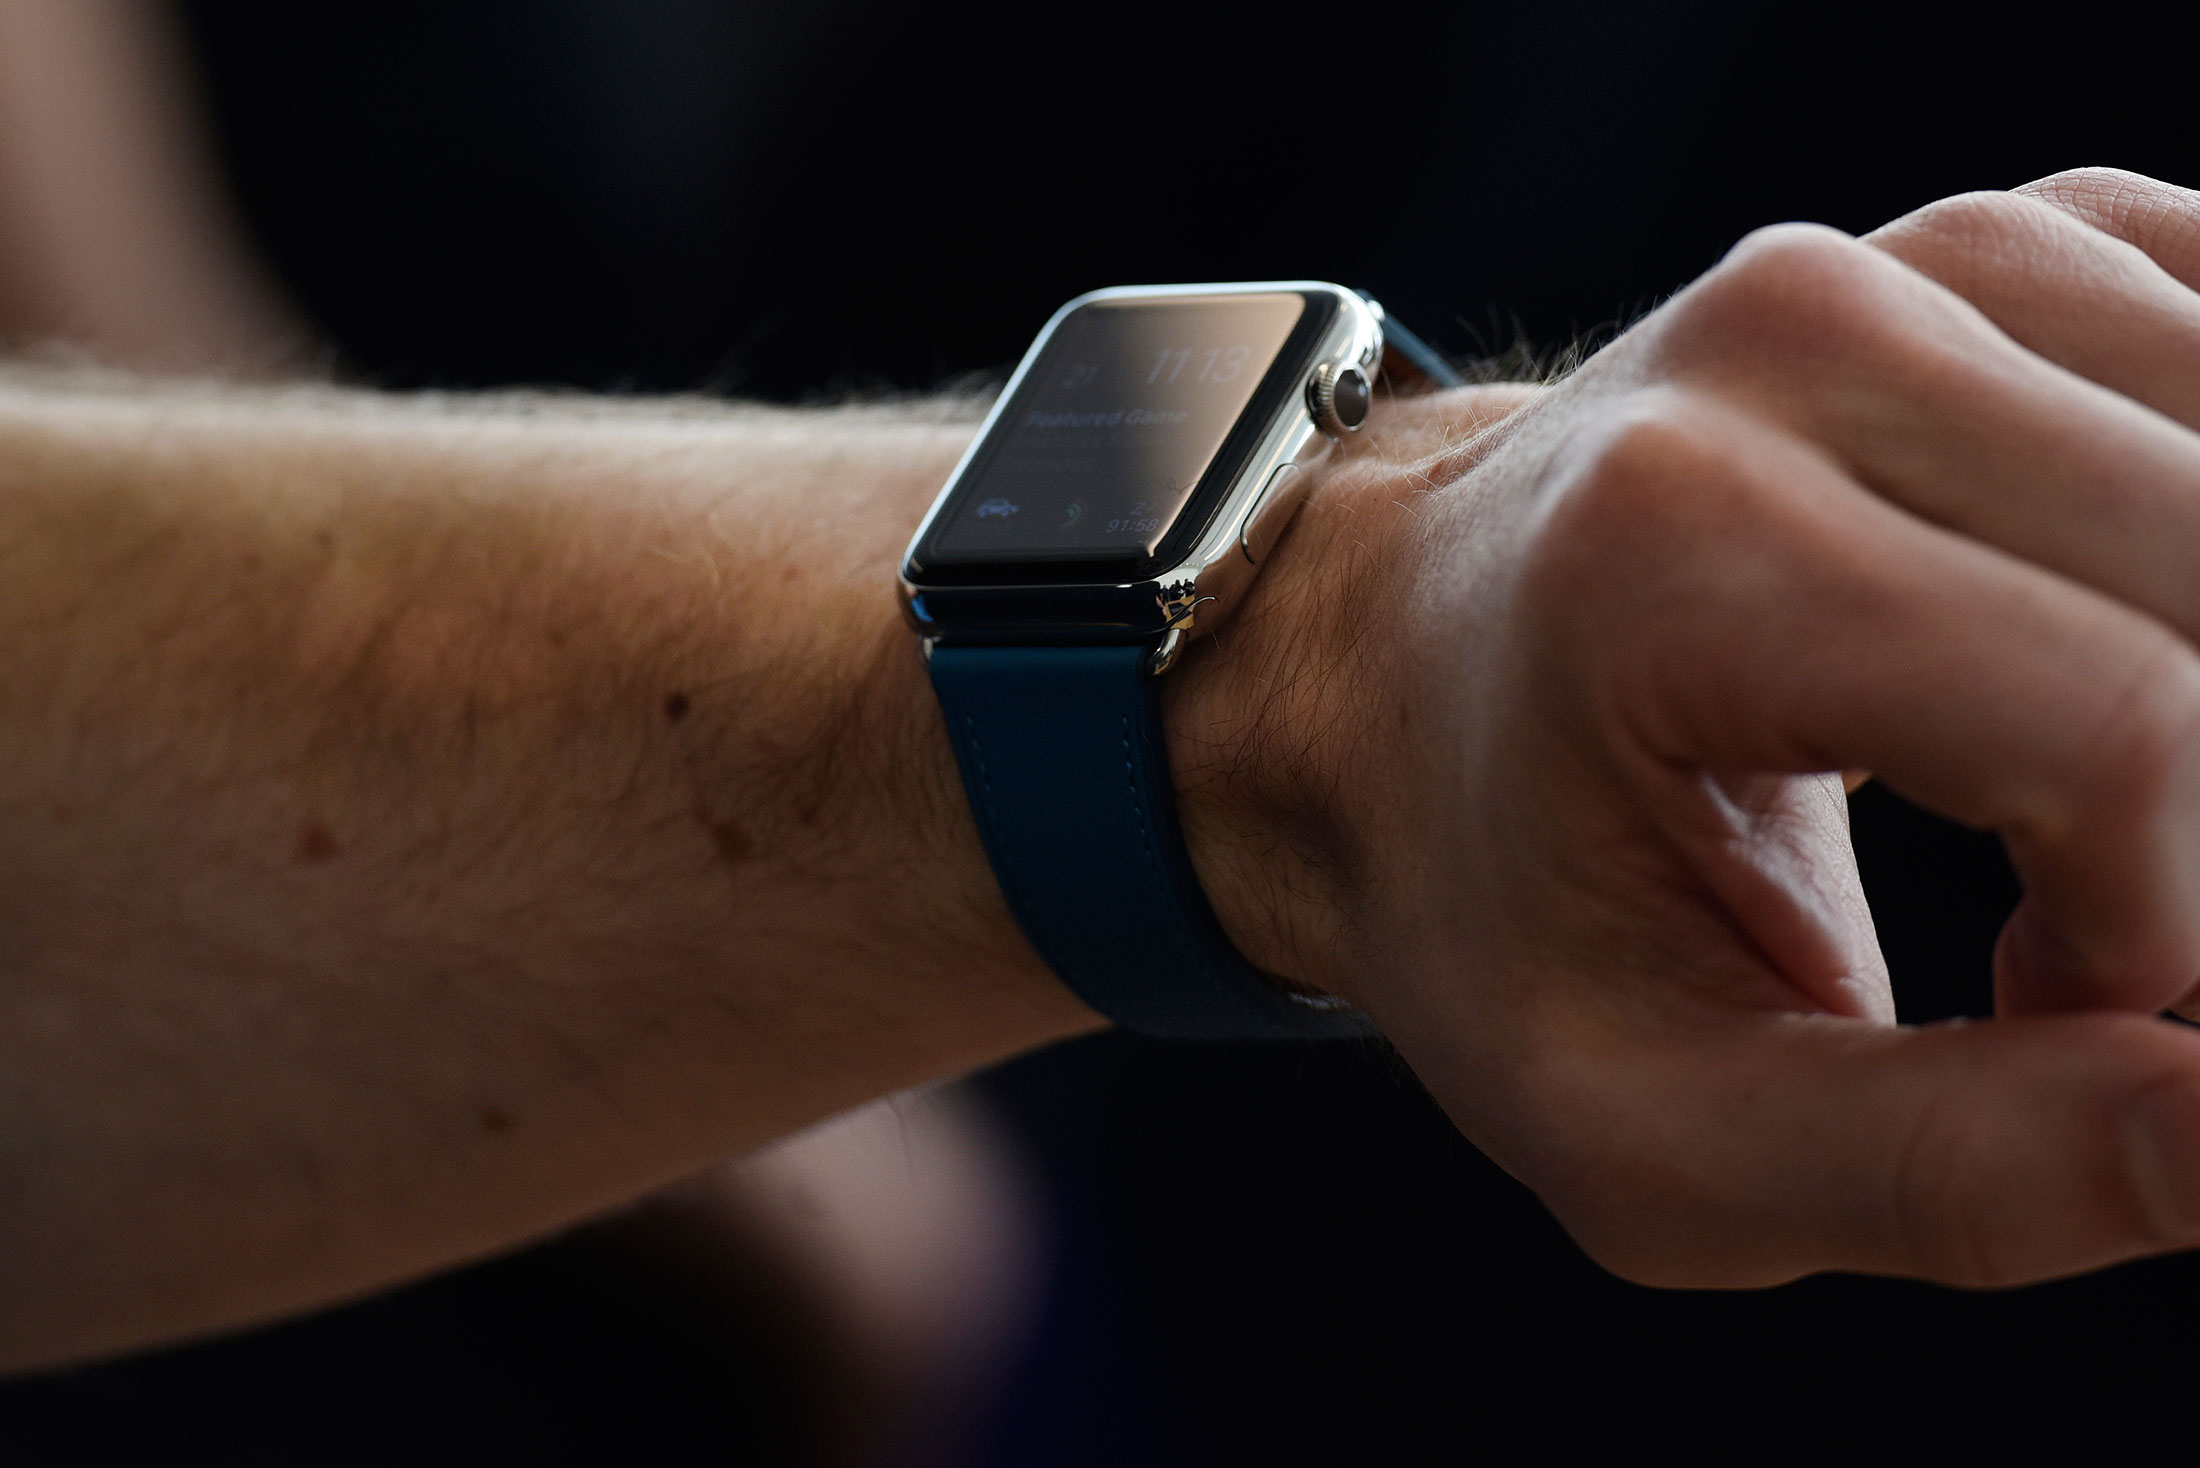 An attendee tries on the Apple Watch after an Apple Inc. event in Cupertino, California, U.S., on Monday, March 21, 2016. Apple Inc. unveiled a new, smaller iPhone that will start at $399, seeking to jump-start sales of its flagship product by enticing more users to upgrade, especially in high-growth markets such as China and India.
